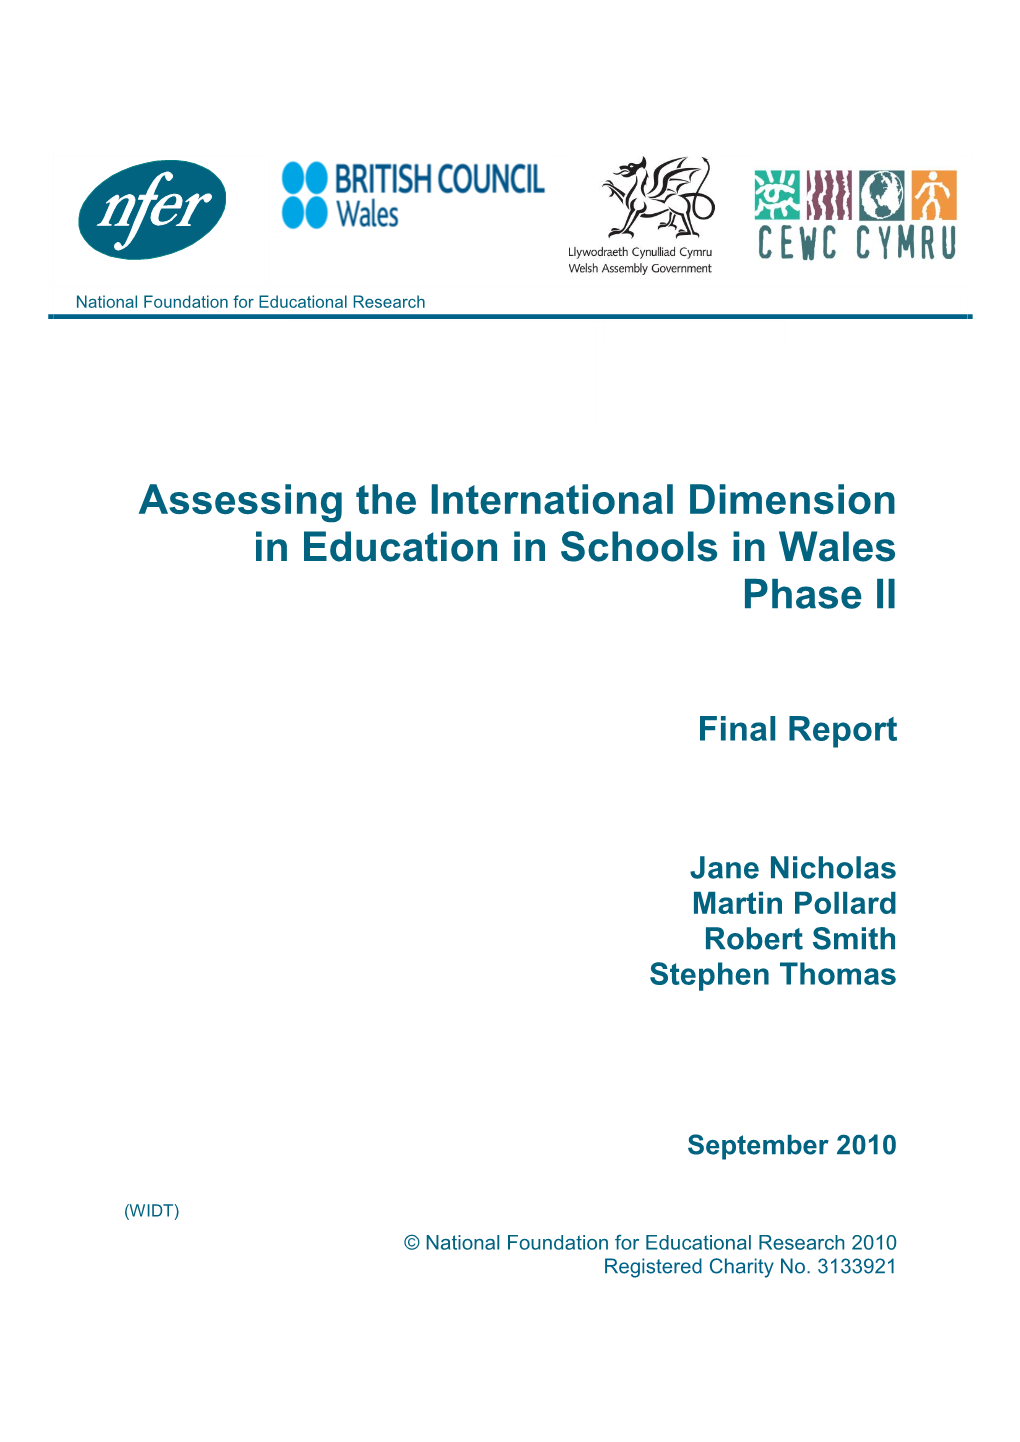 Assessing the International Dimension in Education in Schools in Wales Phase II